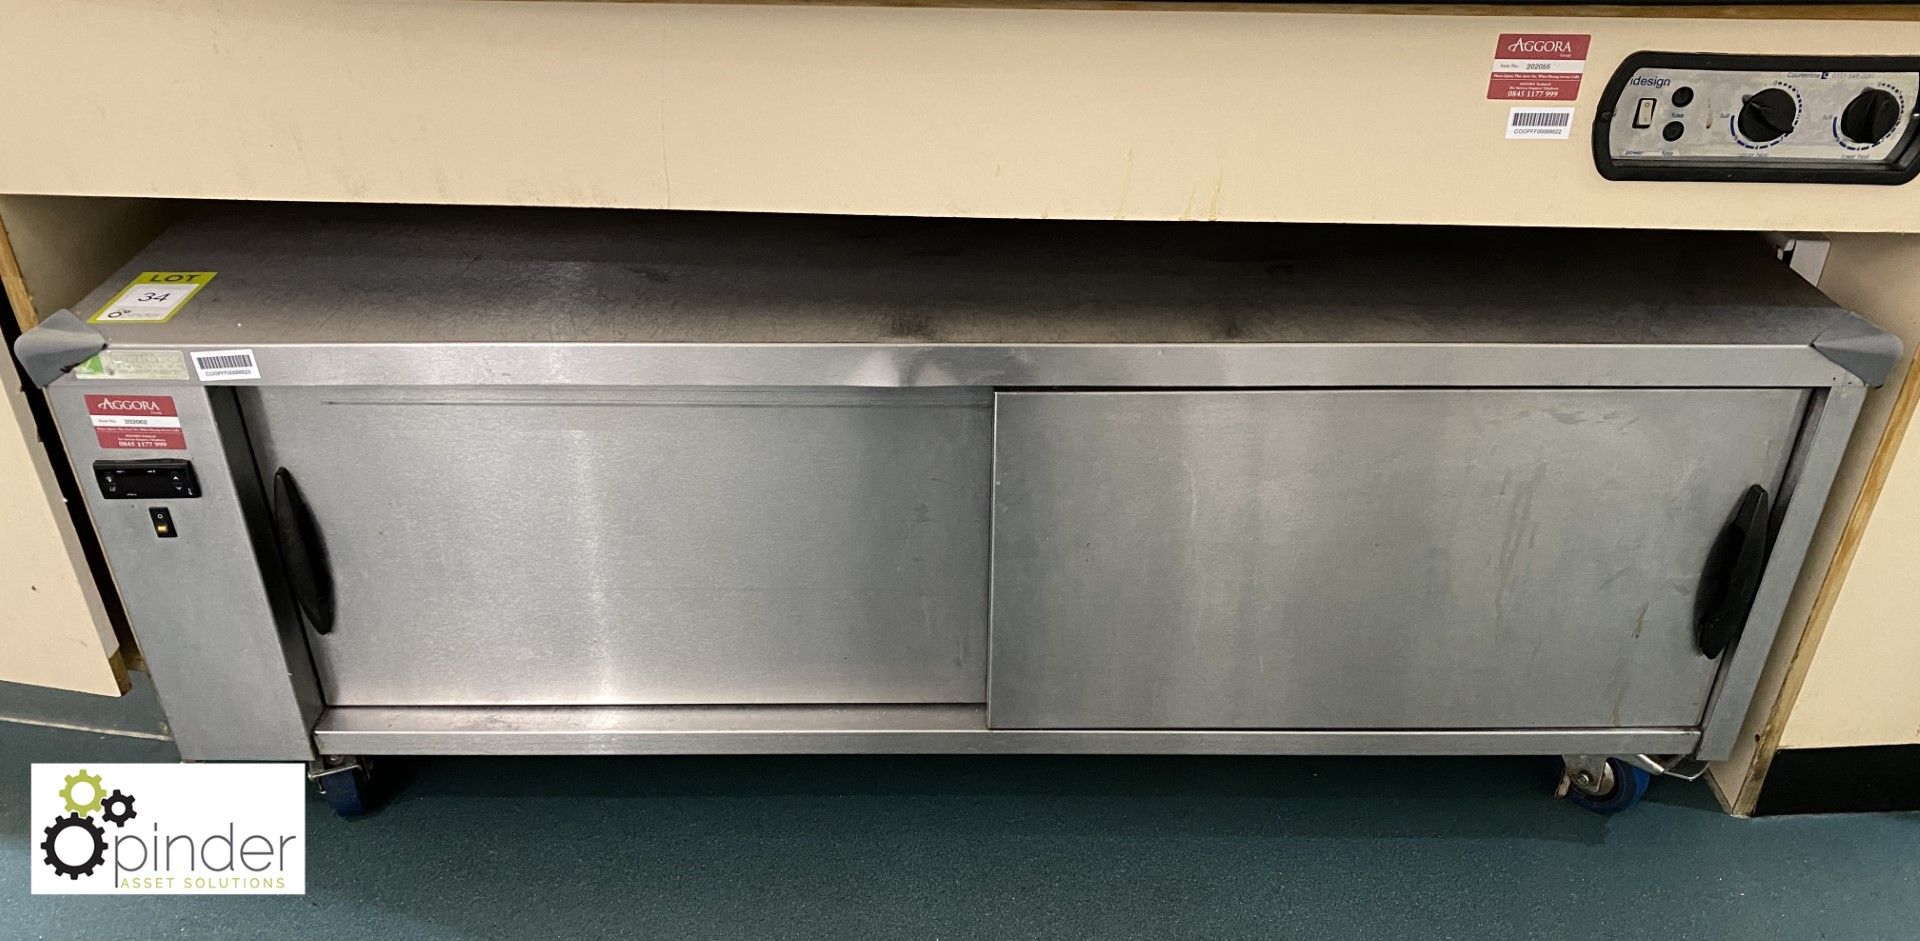 Stainless steel mobile double door Heated Cabinet, 1500mm x 690mm x 570mm high (located in Canteen